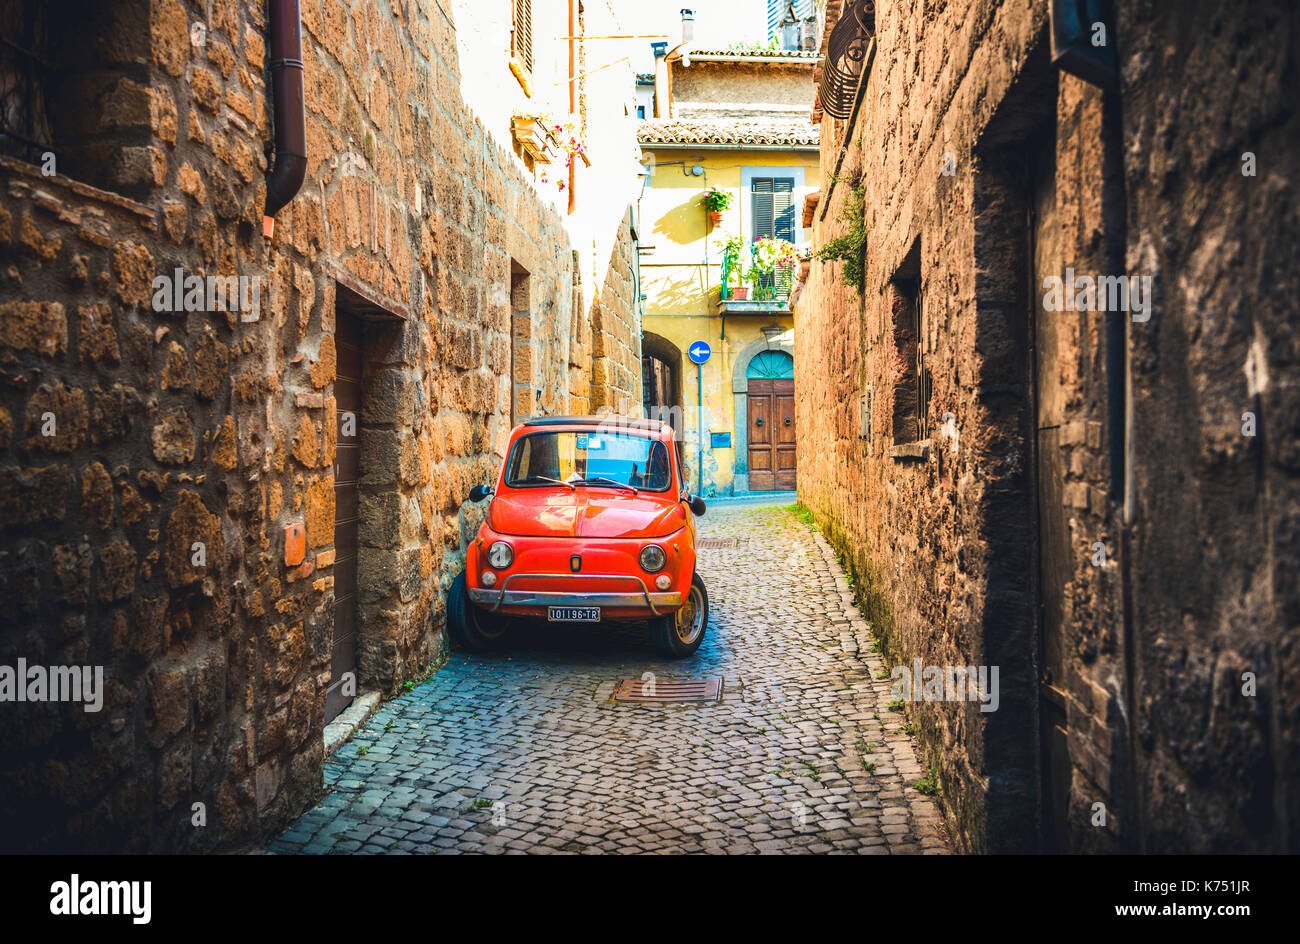 Old red Fiat 500 parked in a narrow alley, classic car, Orvieto, Umbria, Italy Stock Photo